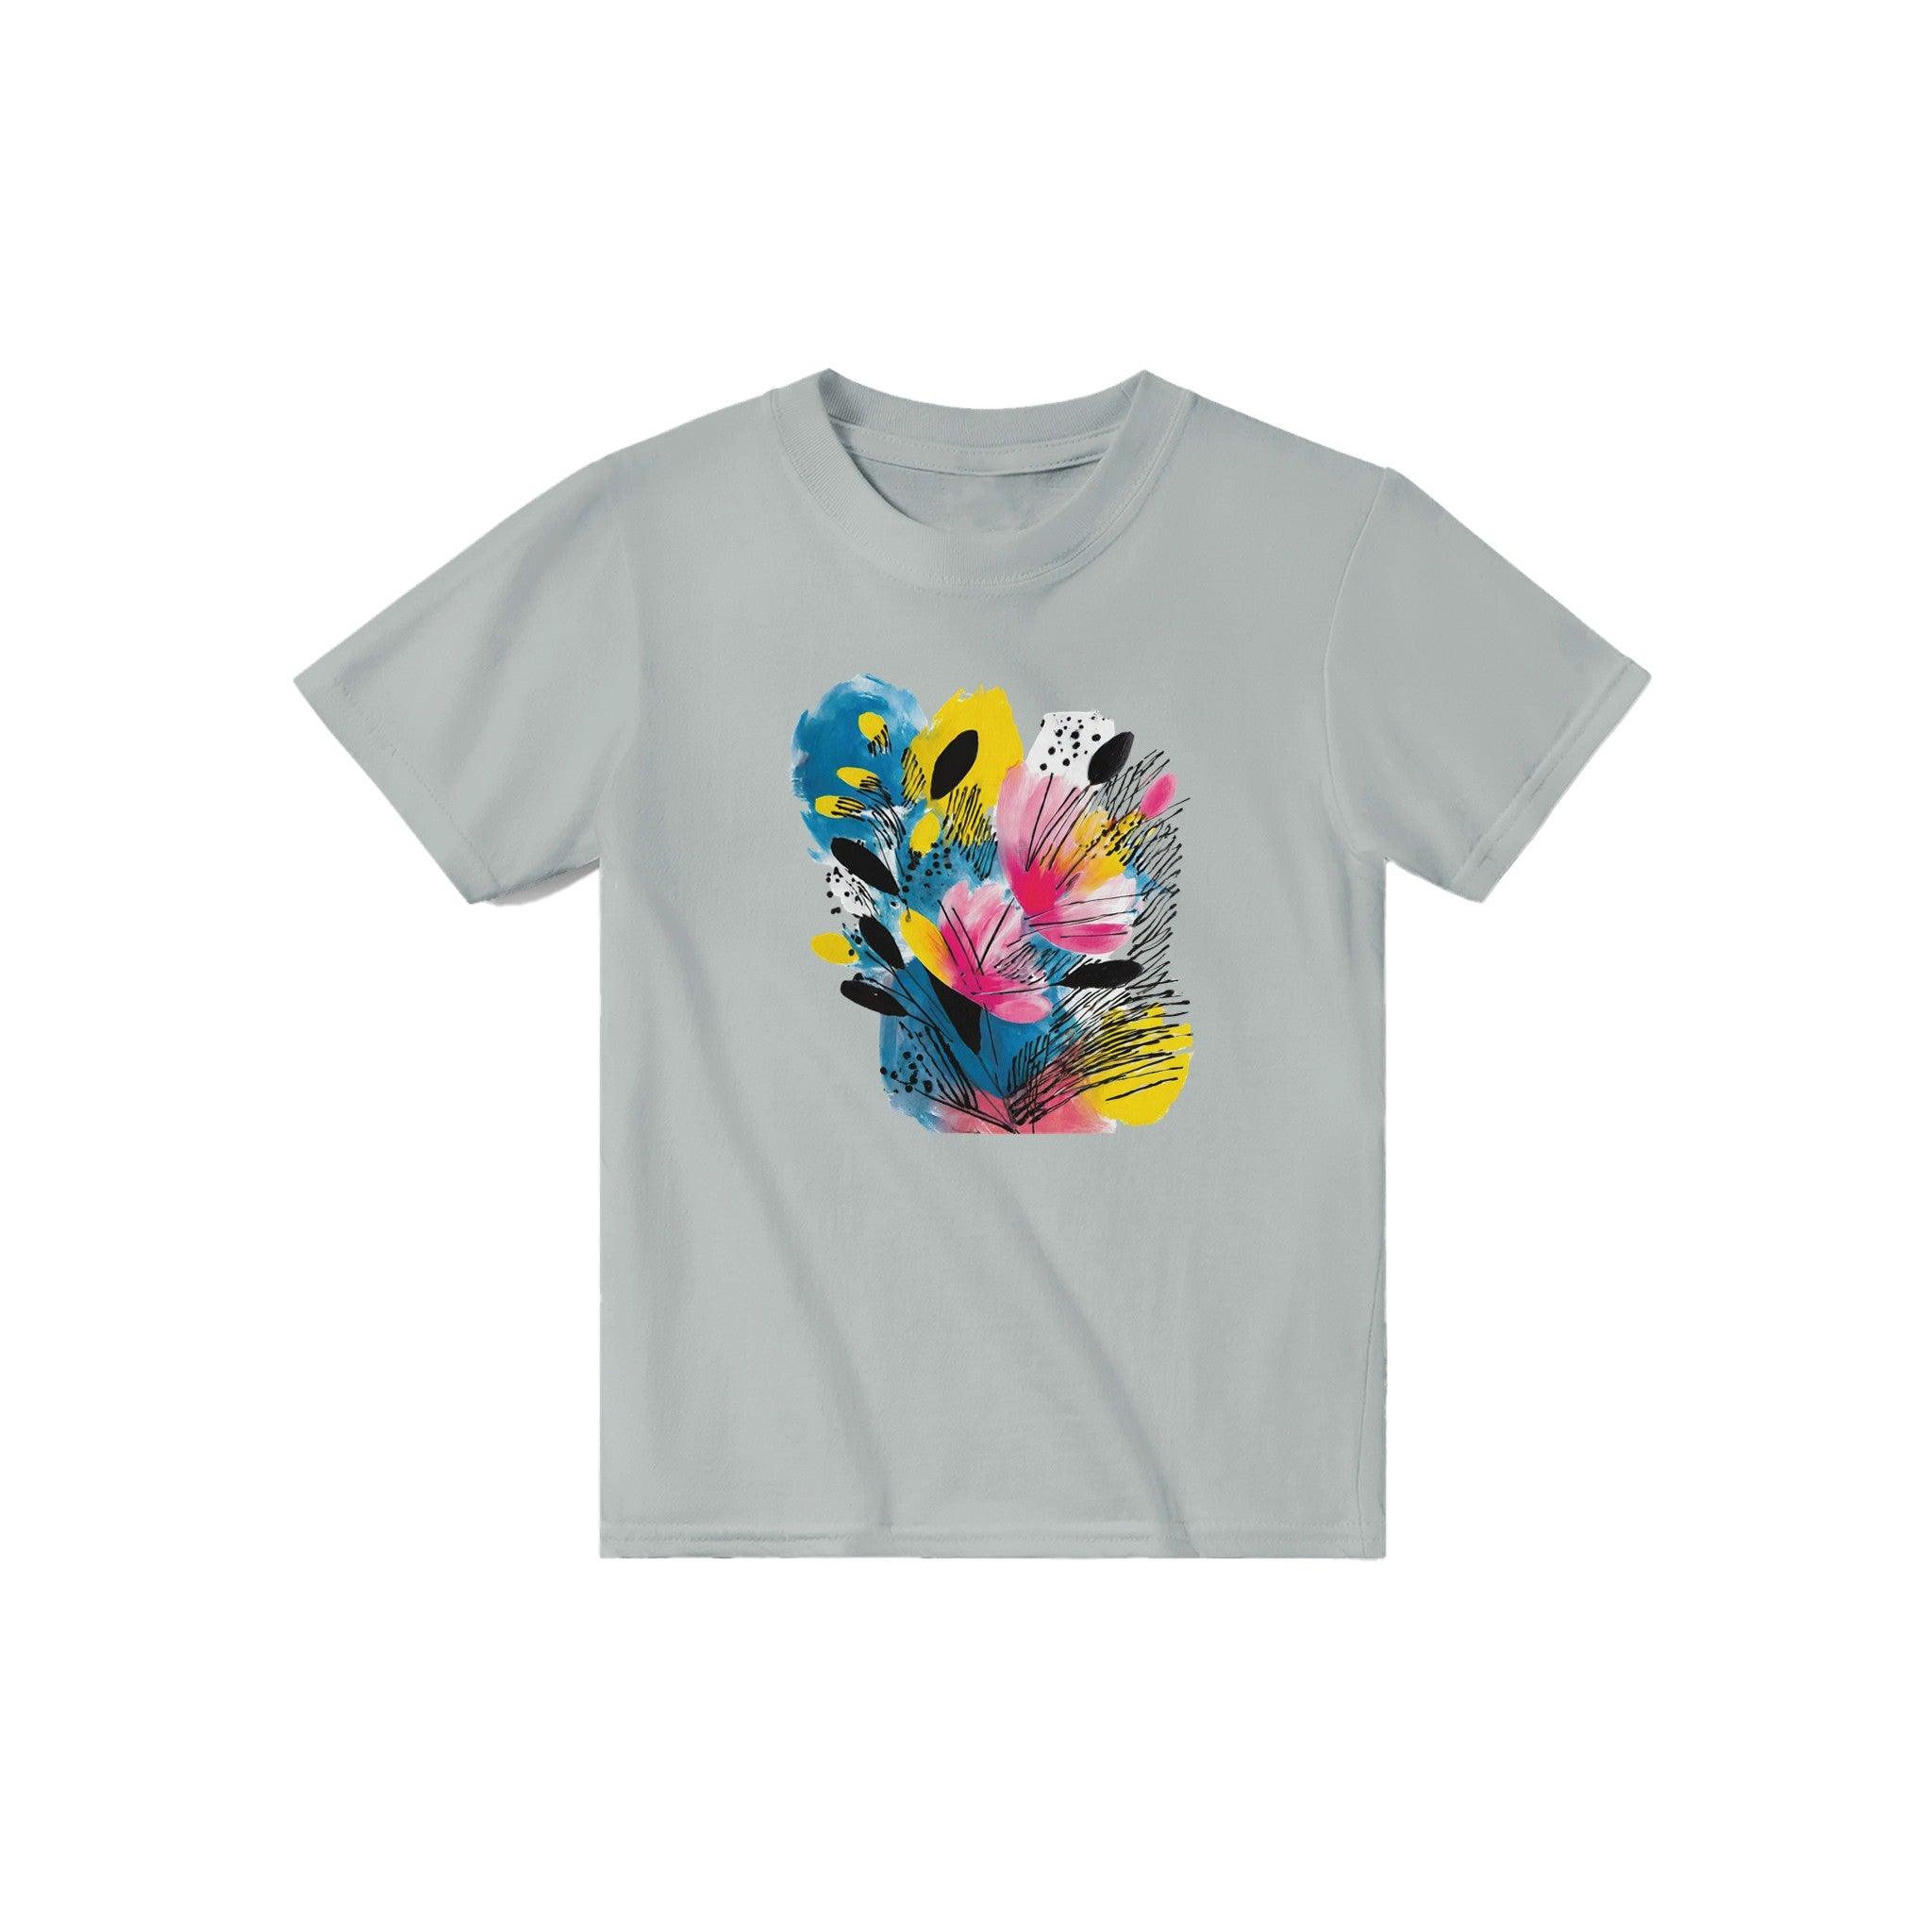 'Floral Paint' Baby Tee - POMA